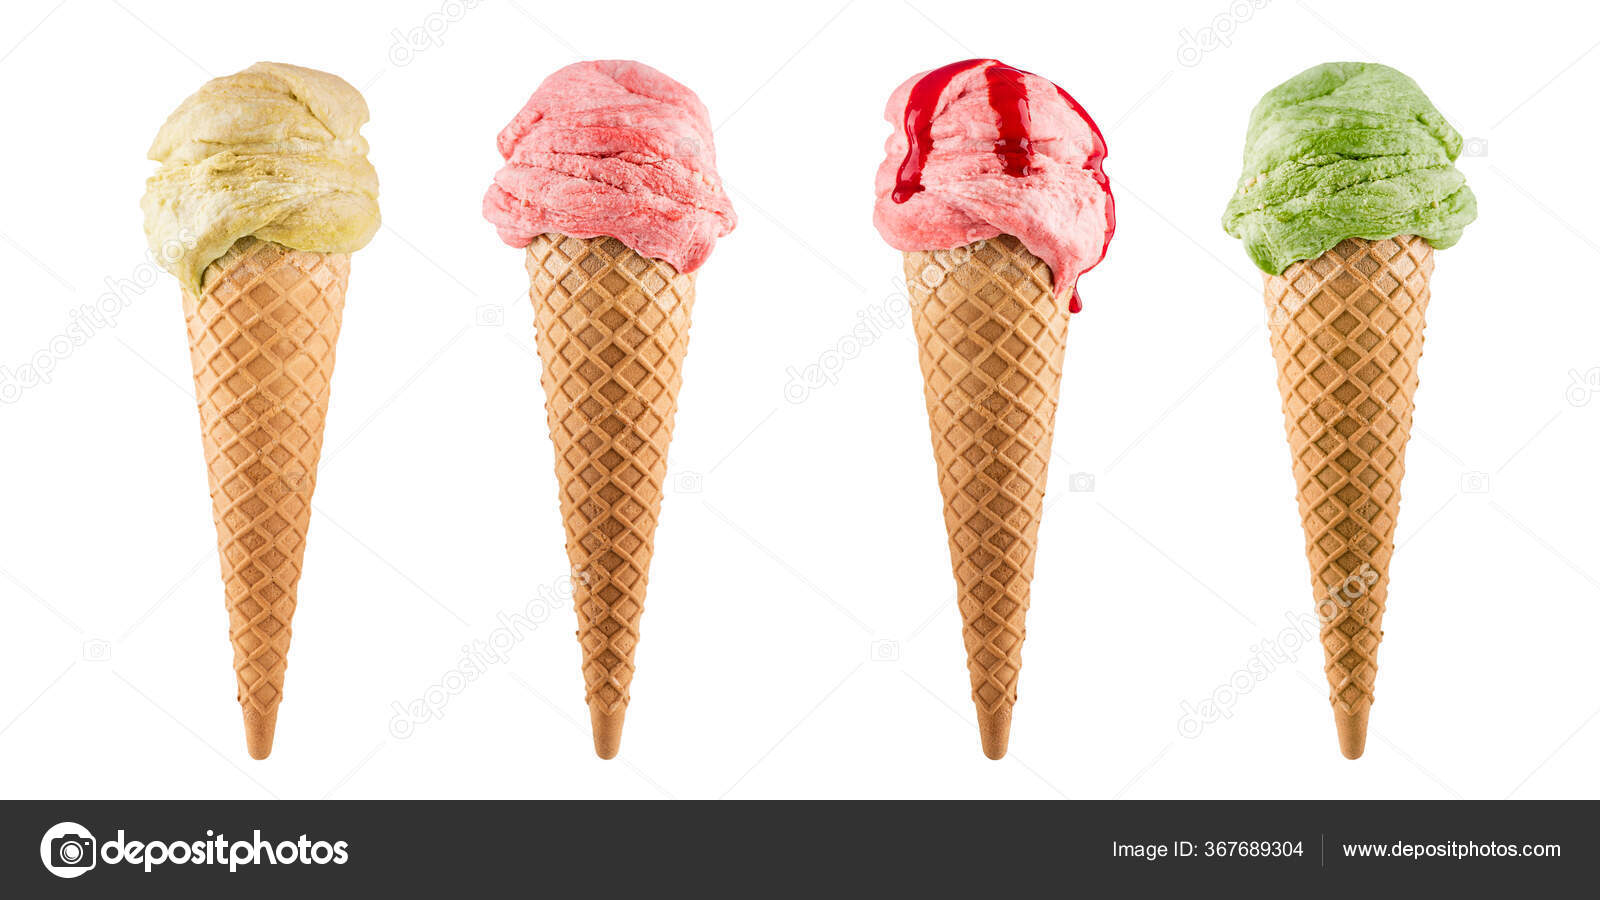 Ice Cream In A Series Of Cones With Different Flavors Background